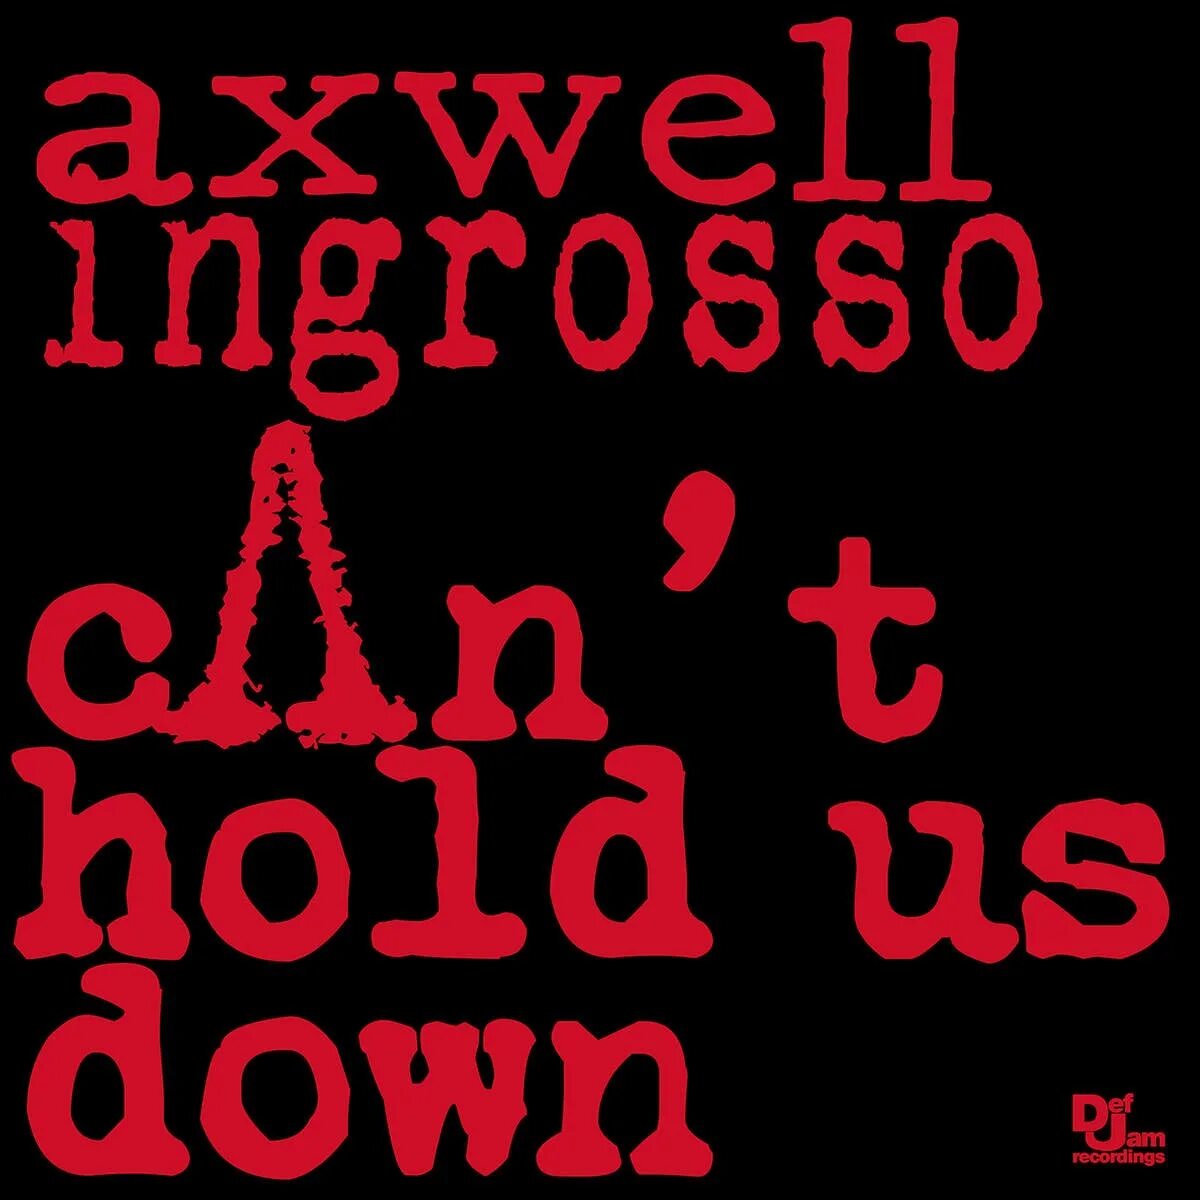 Axwell ingrosso can't hold us down Original Mix. Axwell ingrosso обложка. Cant hold us. Axwell ingrosso обложка альбома. Песня hold us